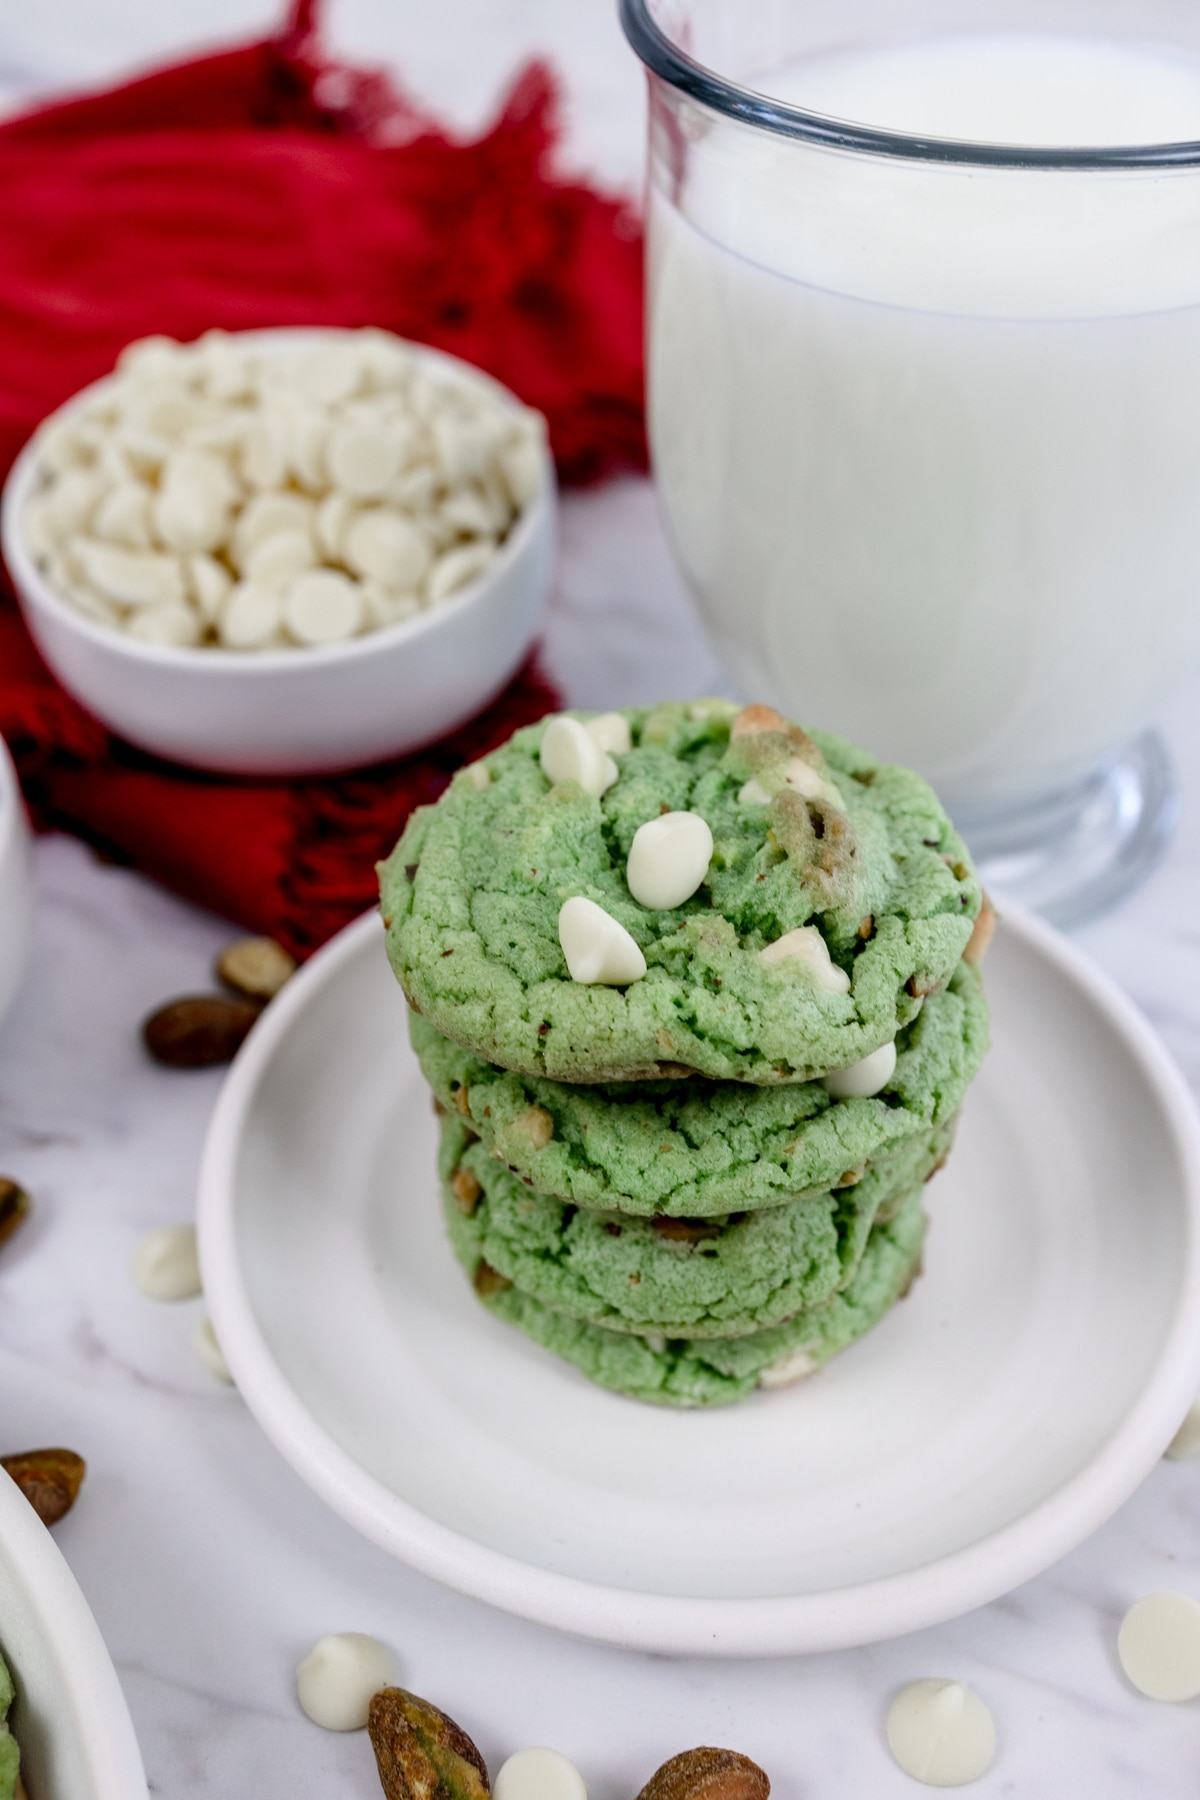 A stack of pistachio pudding cookies on a white plate with a glass of milk behind it.